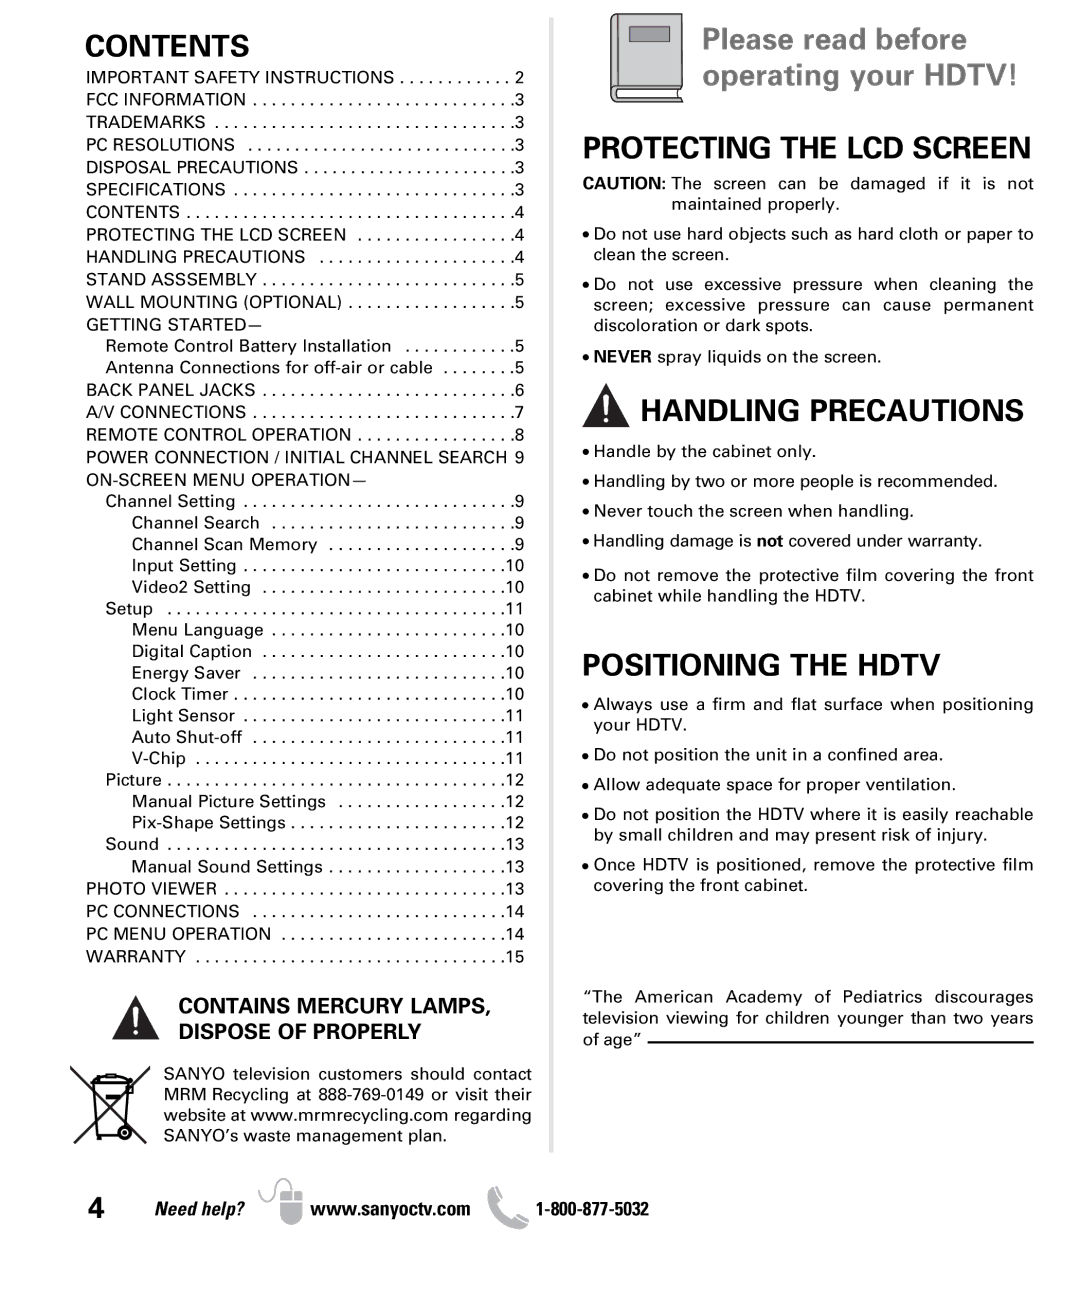 Sanyo DP26640 owner manual Contents, Protecting the LCD Screen, Handling Precautions, Positioning the Hdtv 